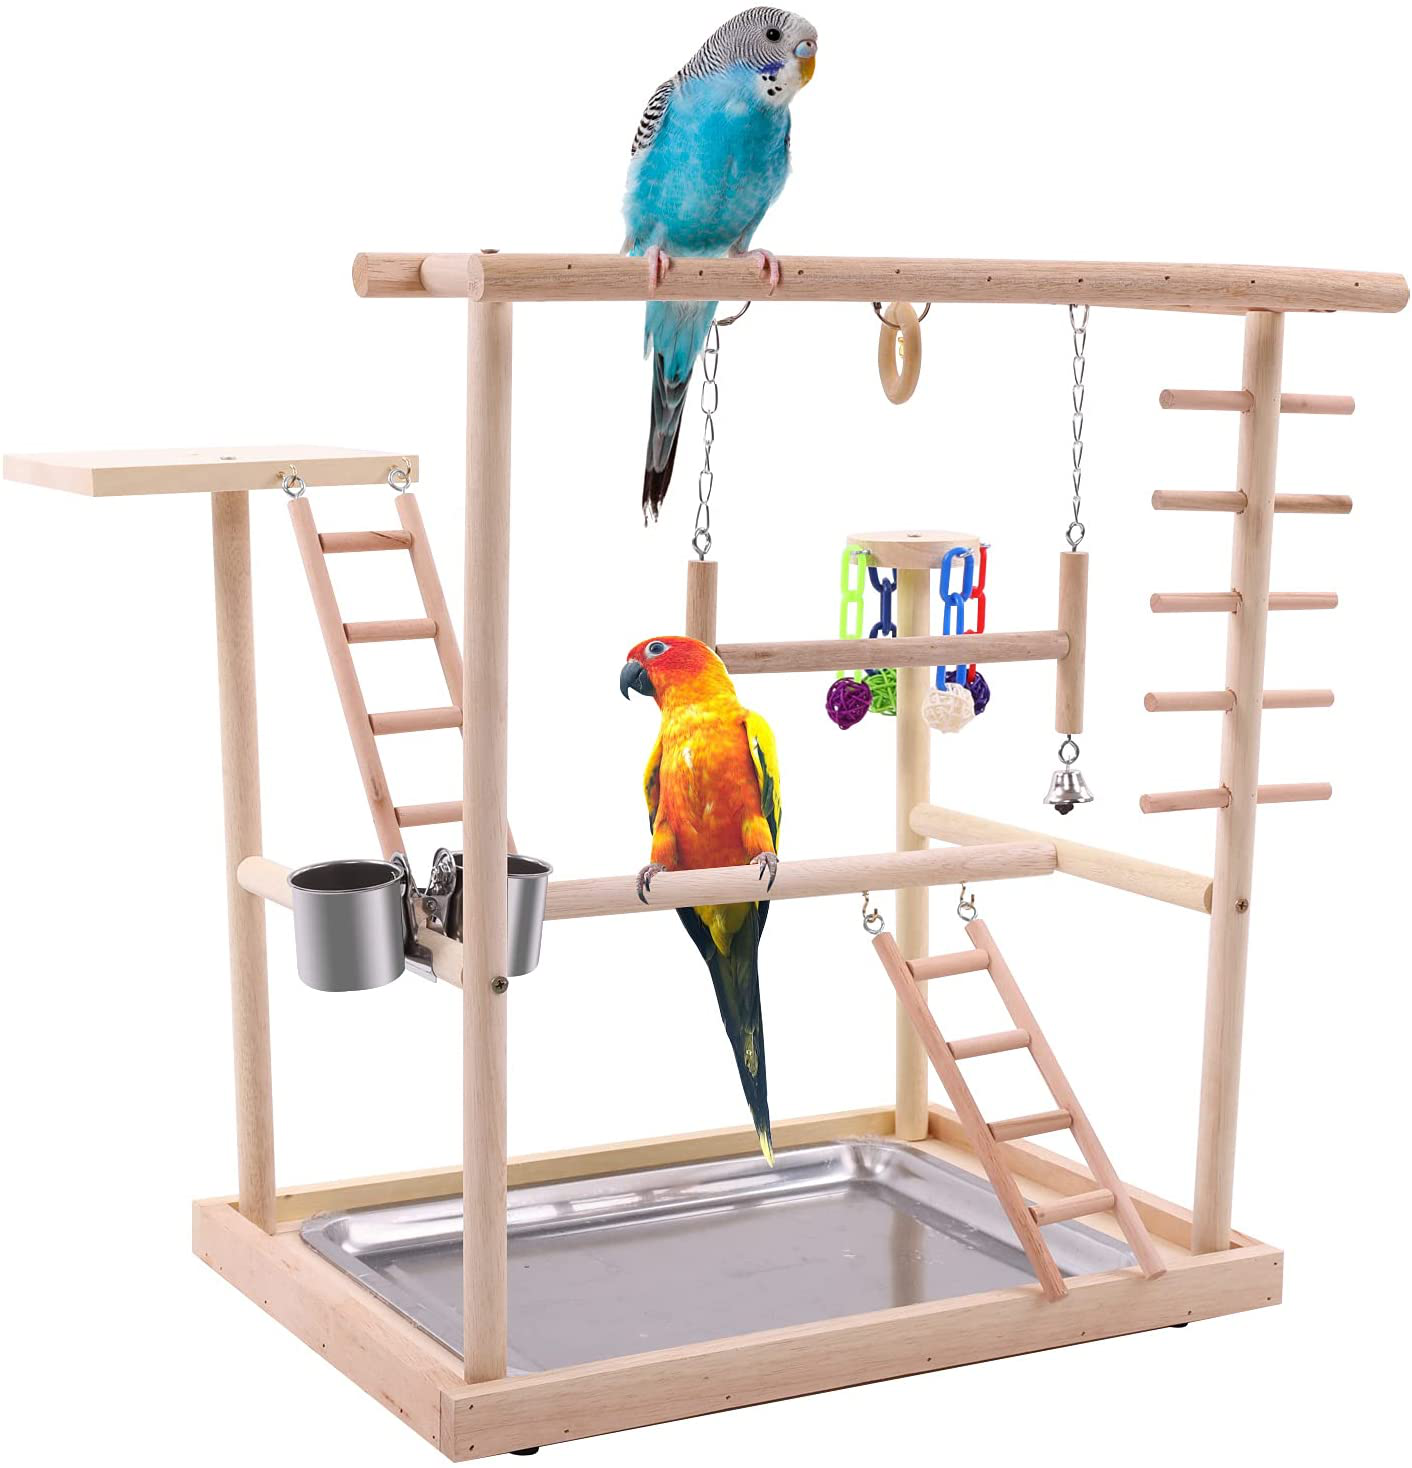 QBLEEV Bird Perches Nest Play Stand Gym Parrot Playground Playgym Playpen Playstand Swing Bridge Wood Climb Ladders Wooden Conures Parakeet Macaw African Animals & Pet Supplies > Pet Supplies > Bird Supplies > Bird Gyms & Playstands QBLEEV New Bird Playpen  